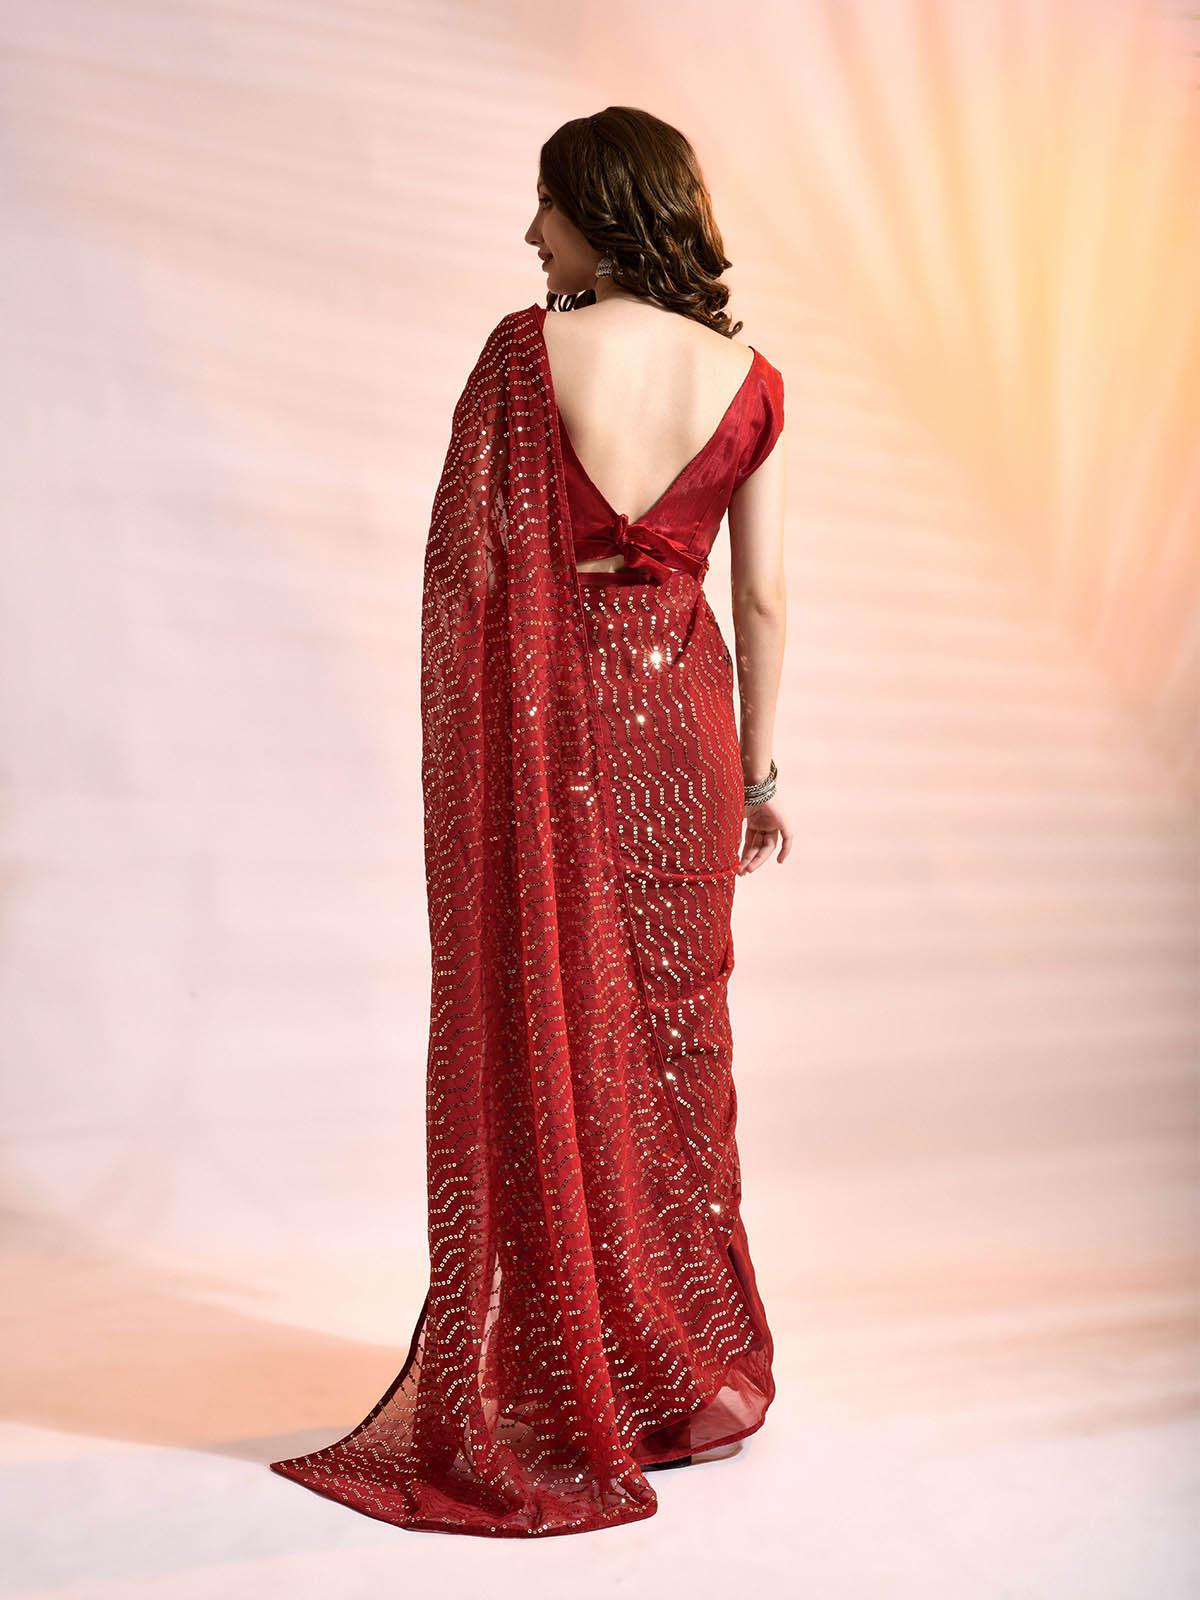 Women's Red Georgette Saree With Blouse - Odette